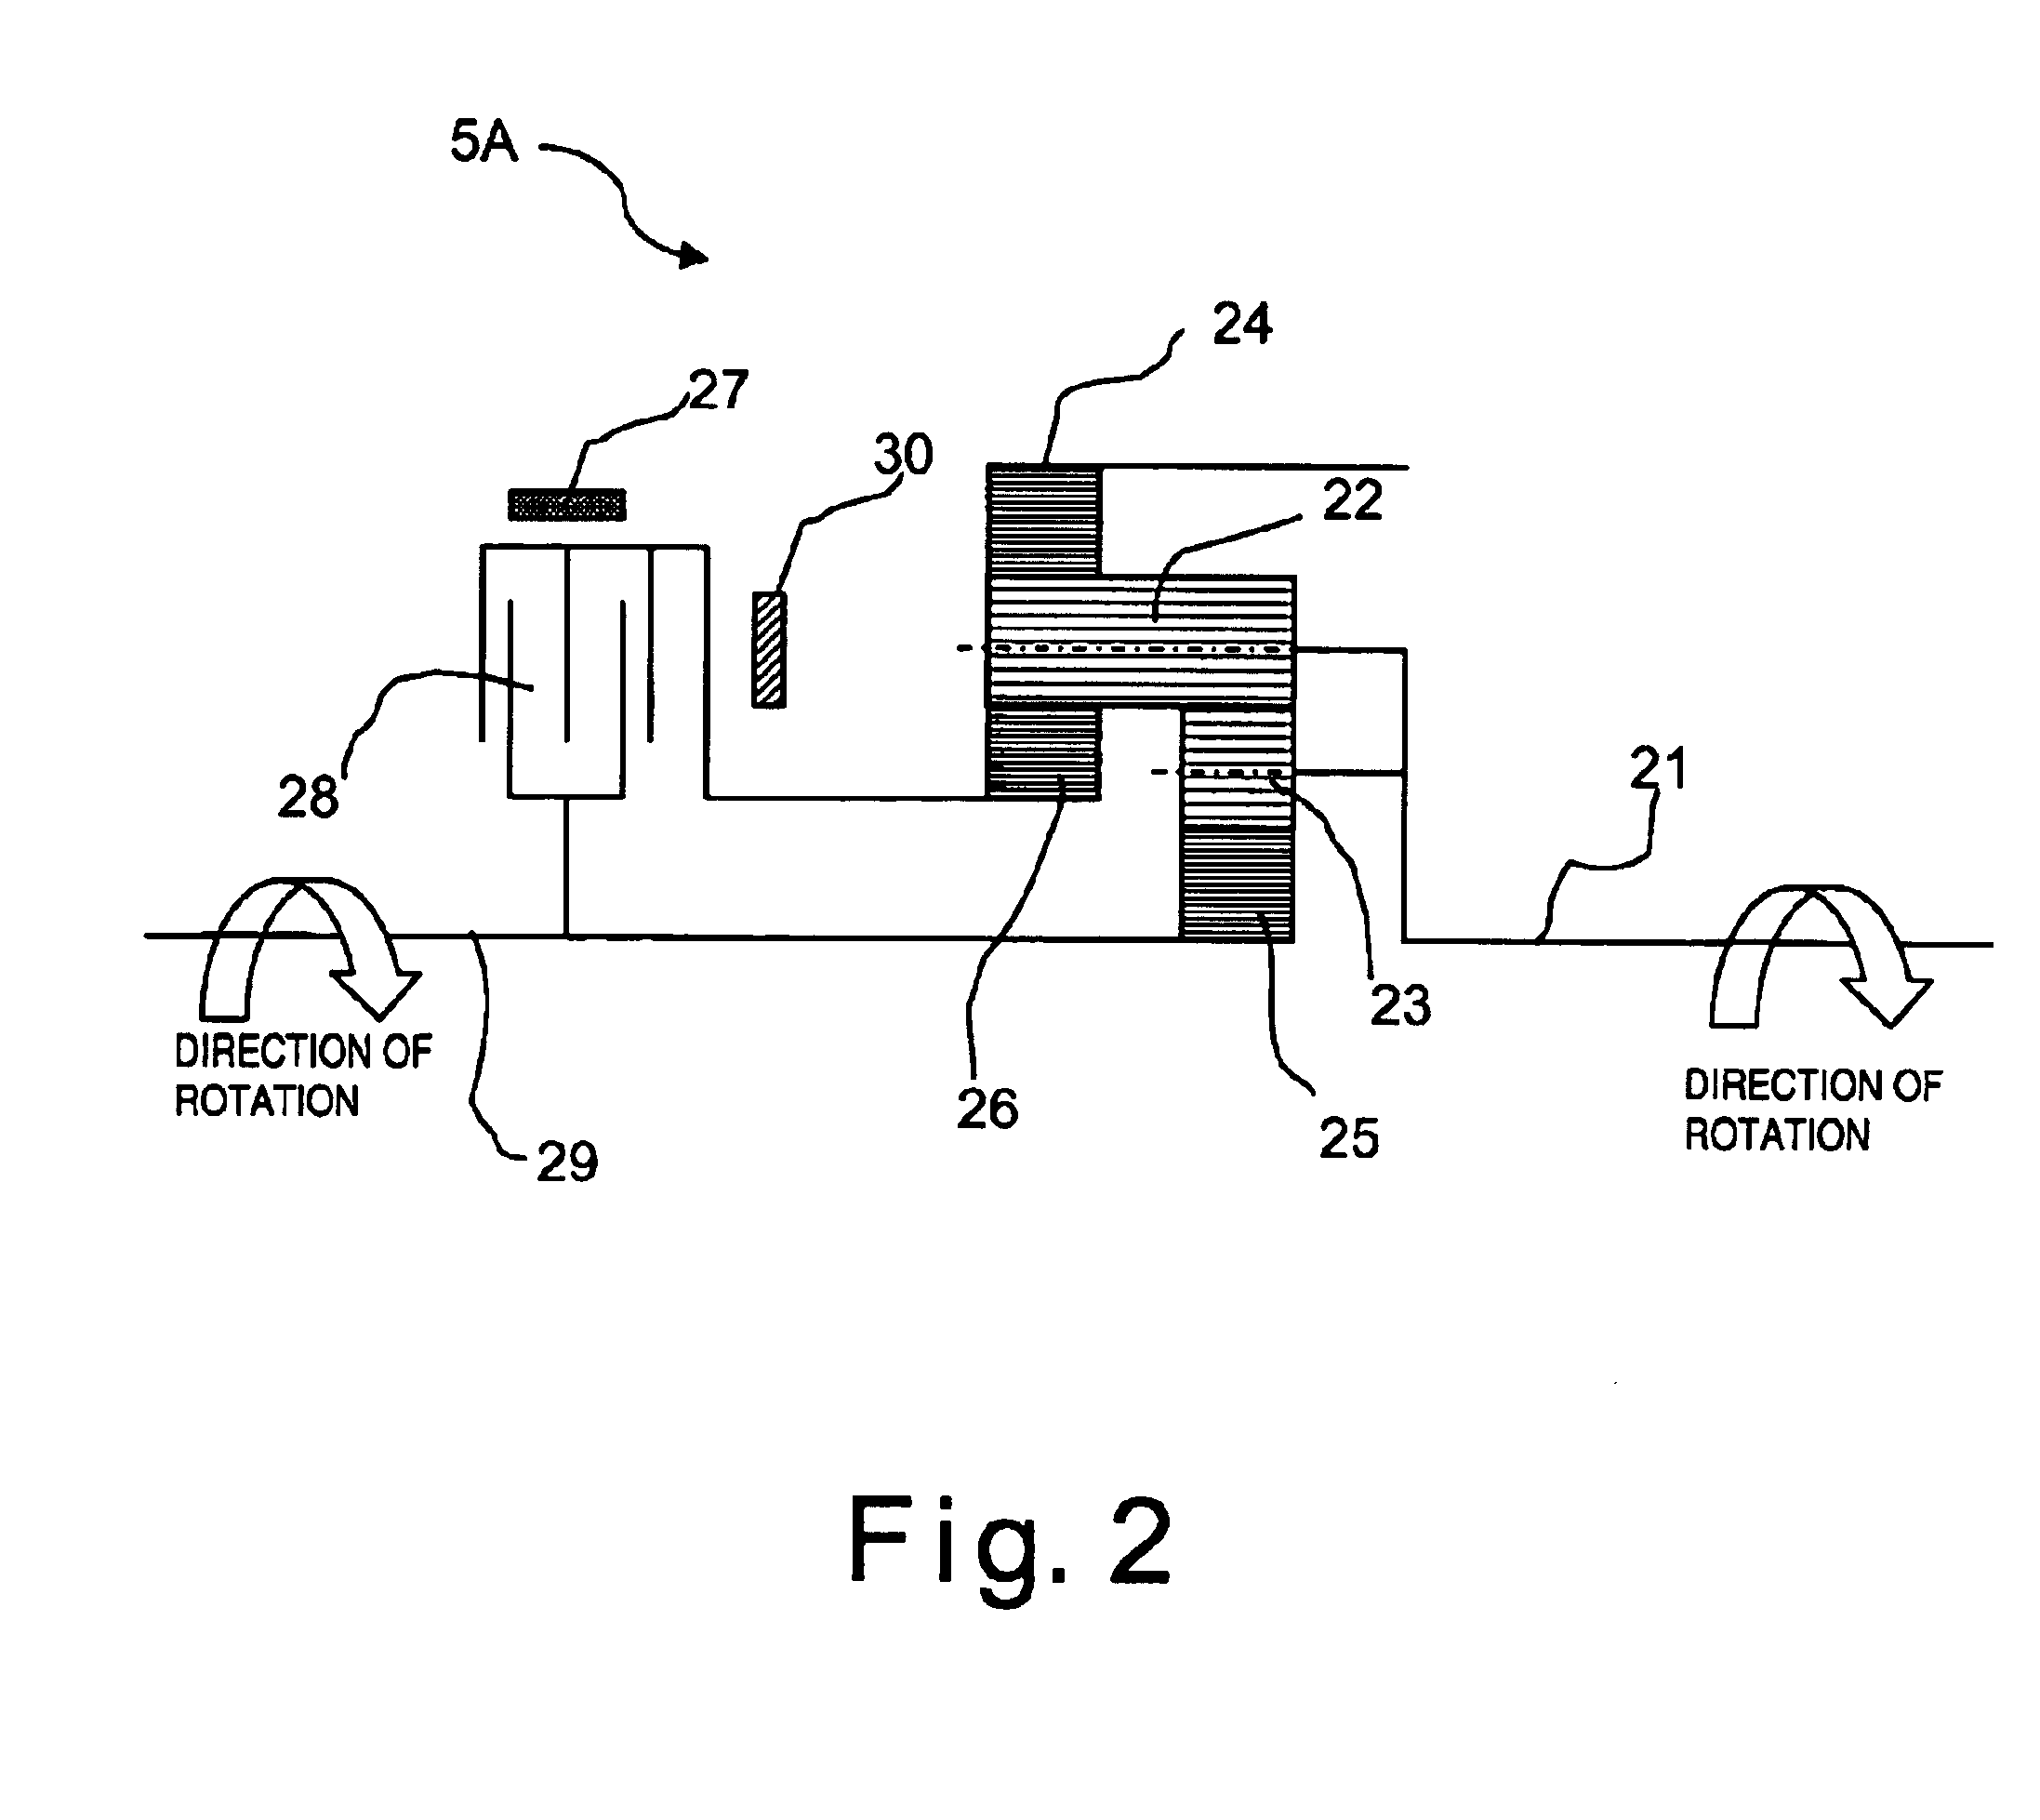 Engine fuel delivery system